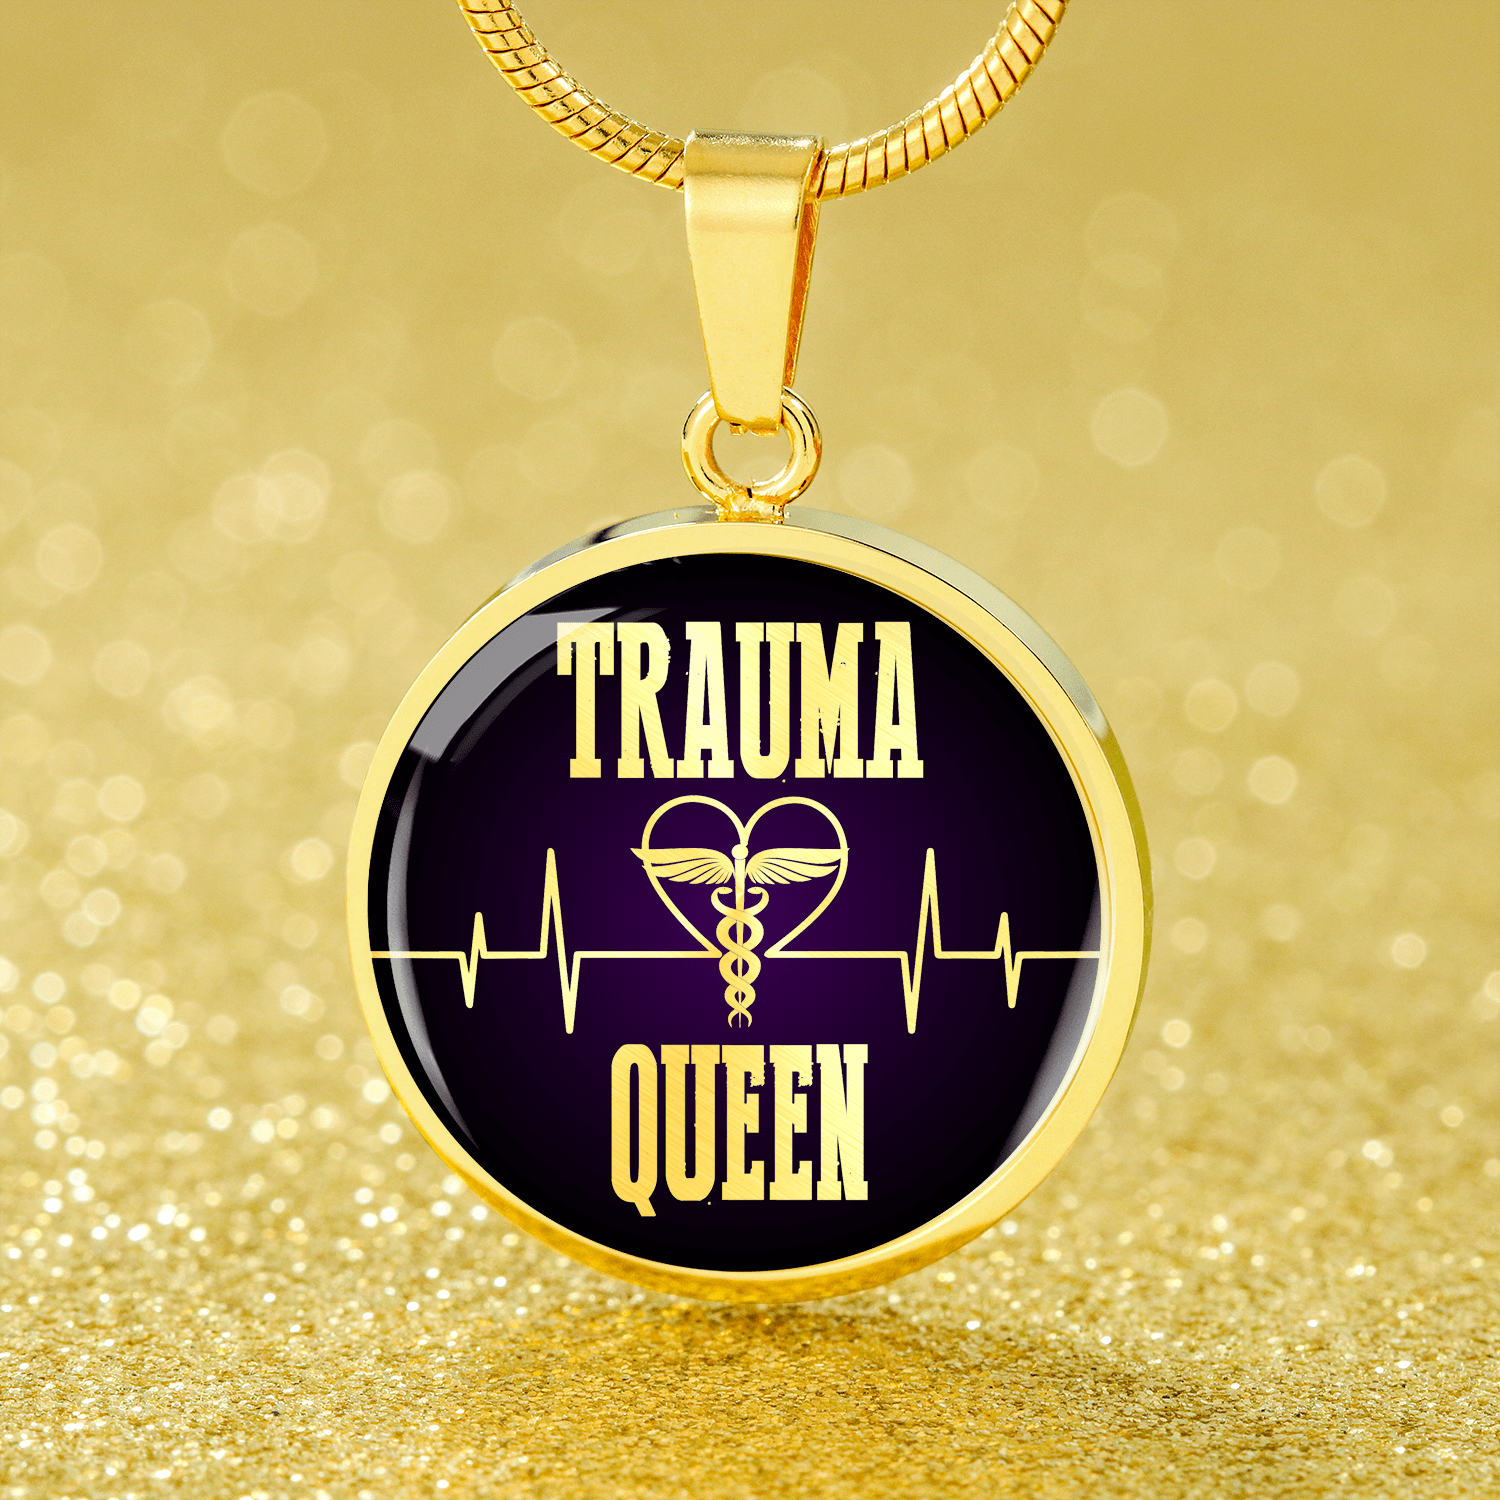 Trauma Queen Nurse Circle Necklace Stainless Steel or 18k Gold 18-22" - Express Your Love Gifts